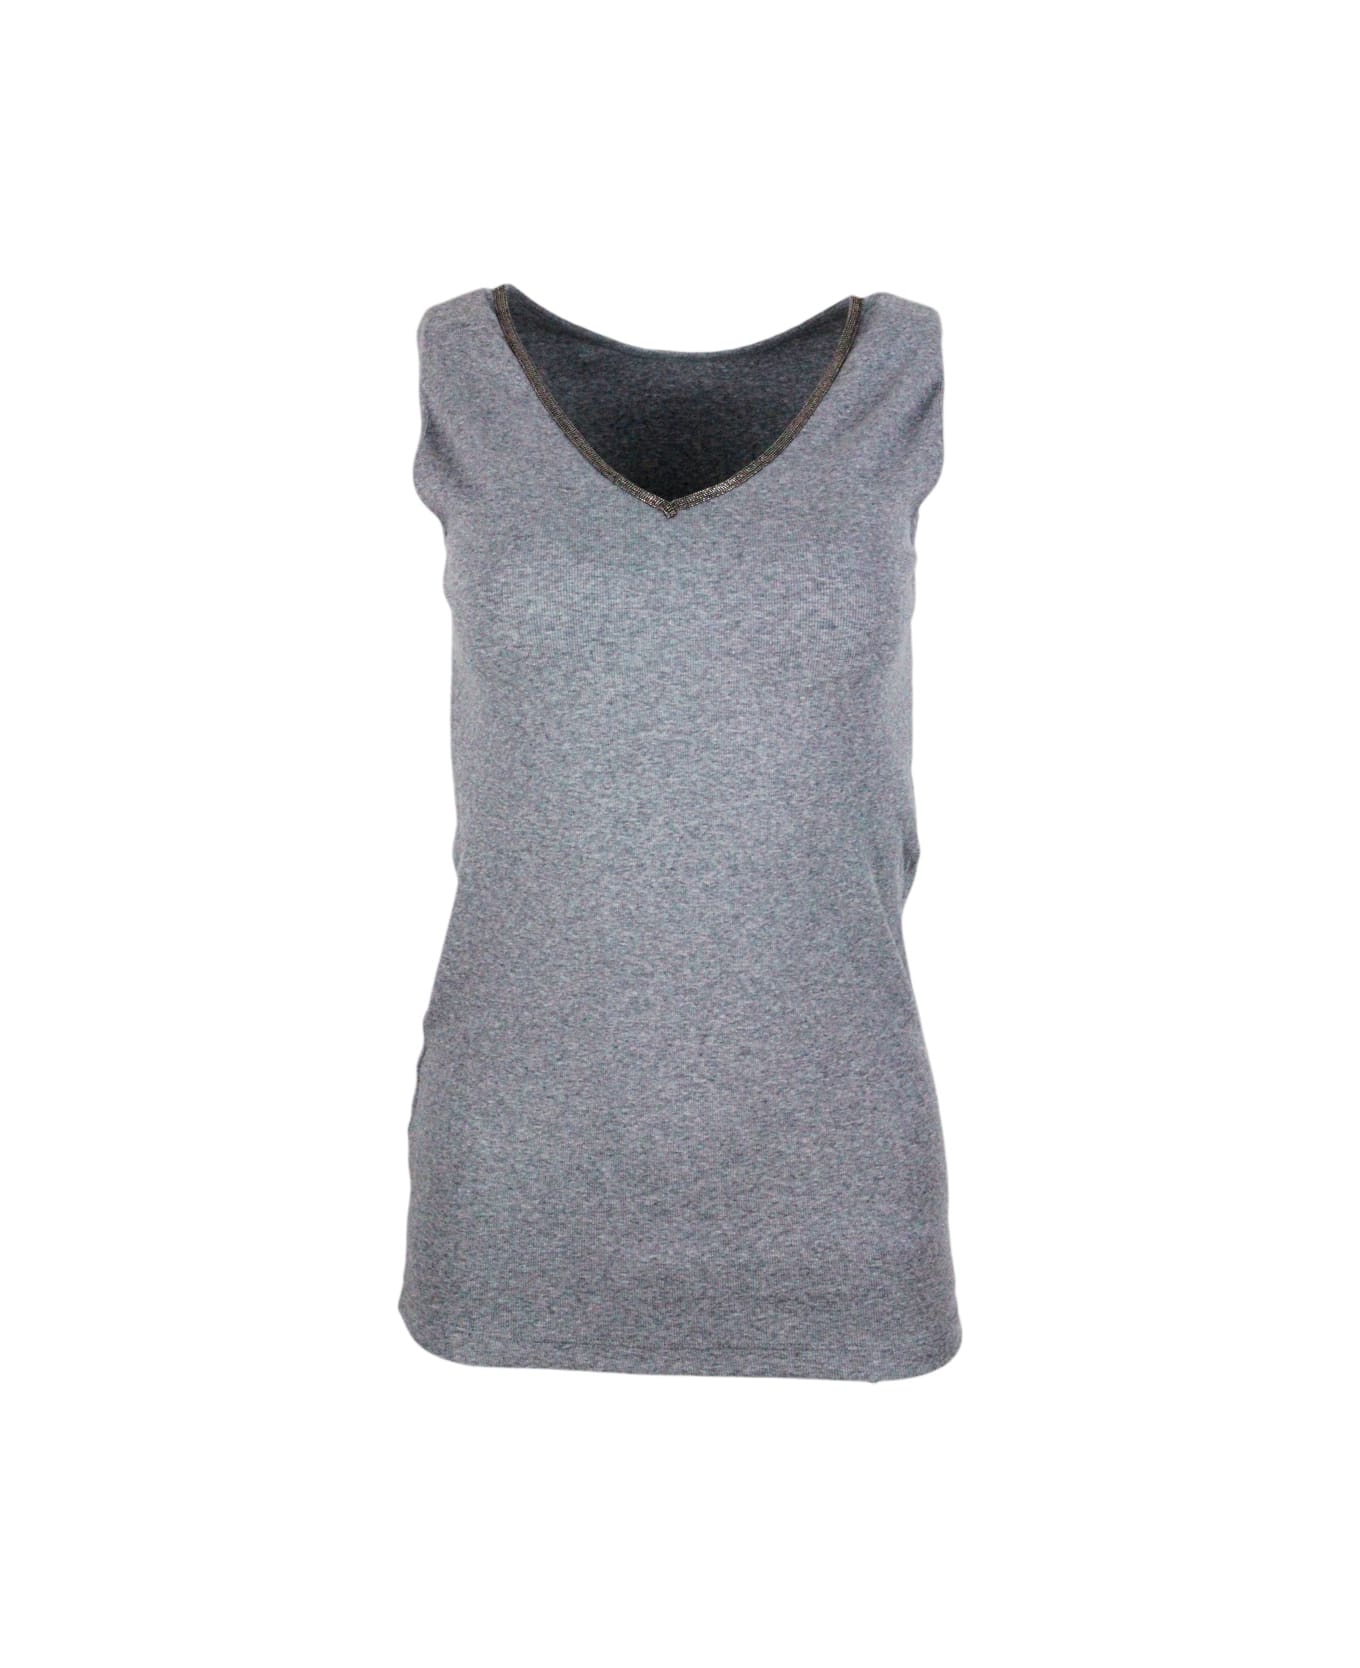 Fabiana Filippi Tank Top In Organic Cotton Jersey With Both V-neck And Crew-neck Embellished With Rows Of Brilliant Jewels On The Neck - Grey